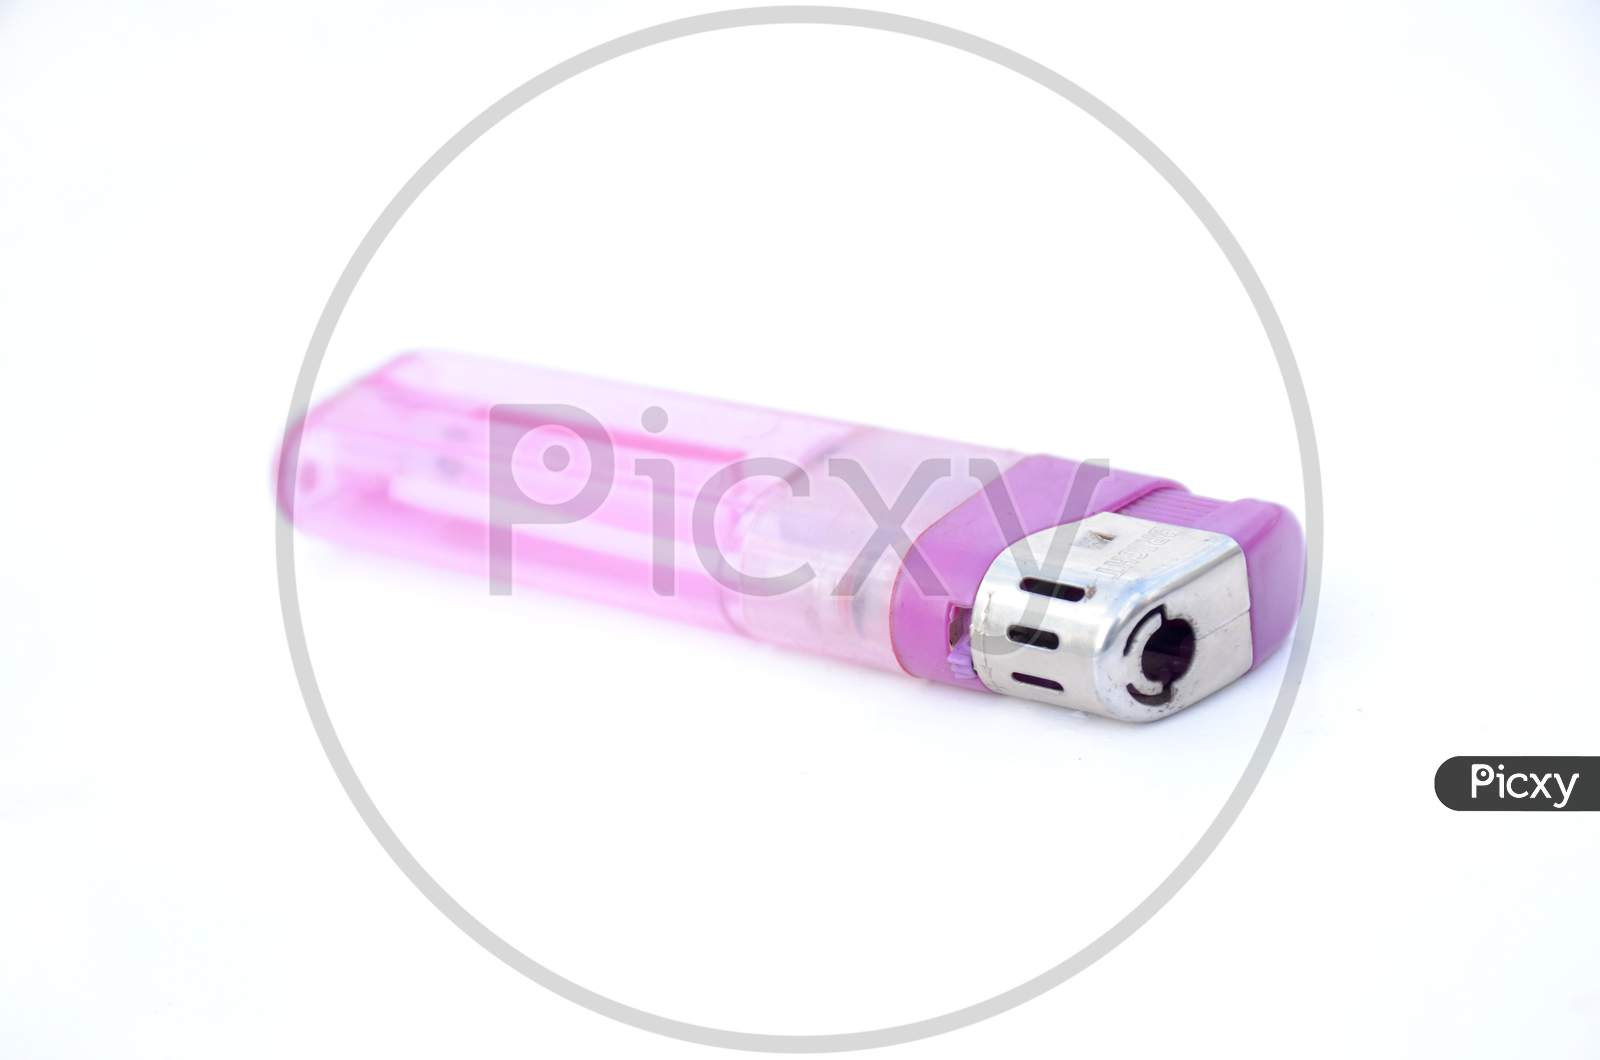 The Purple Color Gas Lighter Isolated On White Background.